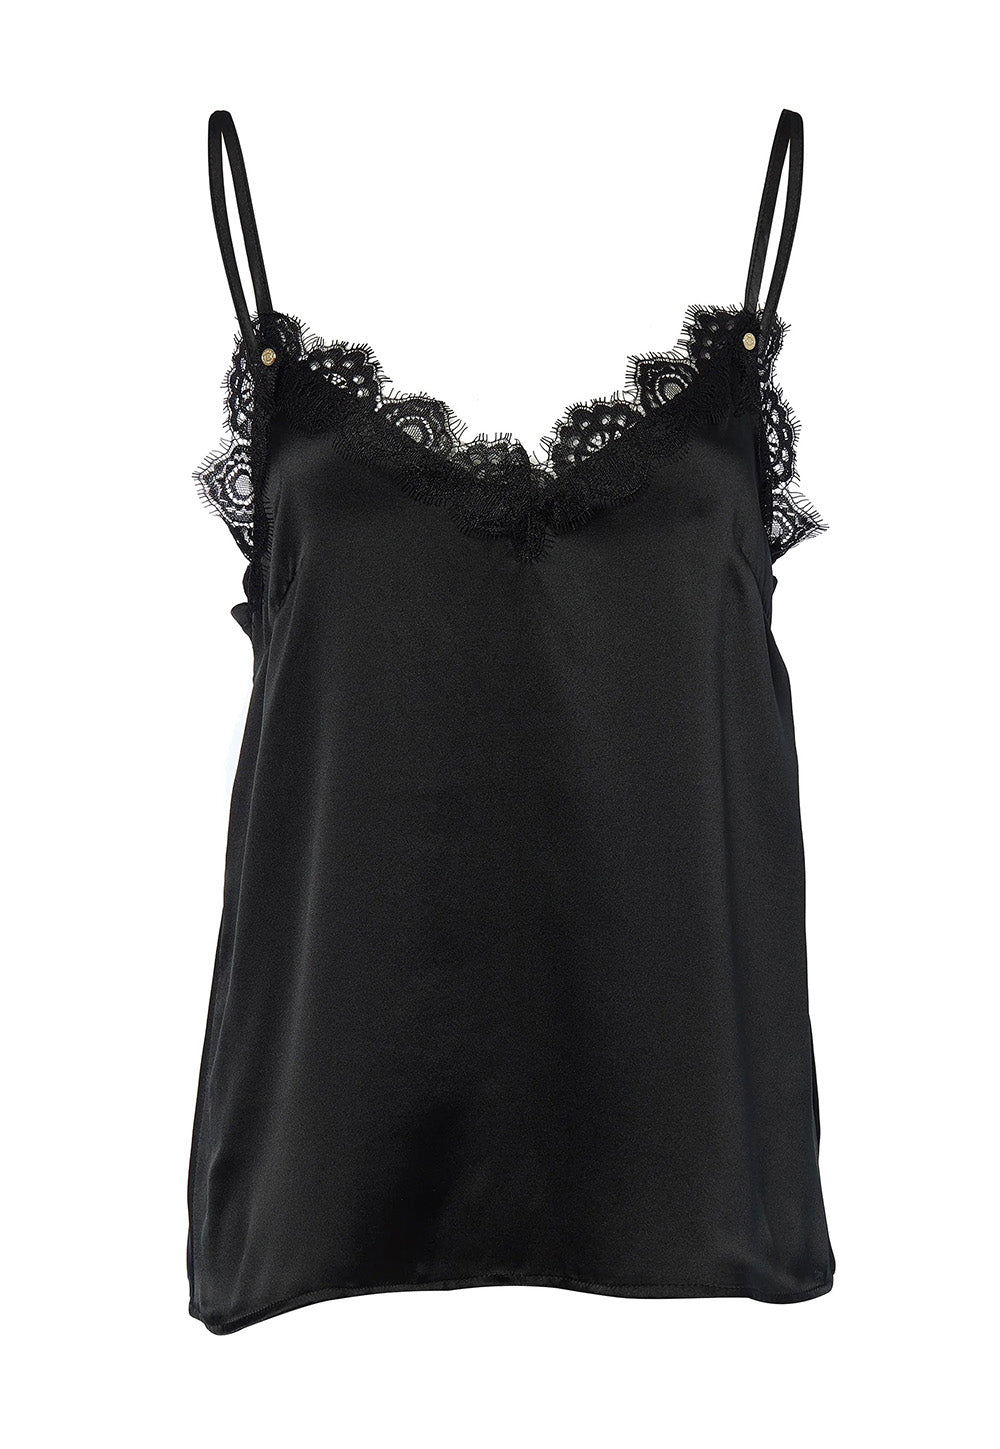 Silk Lace Cami - Black sold by Angel Divine